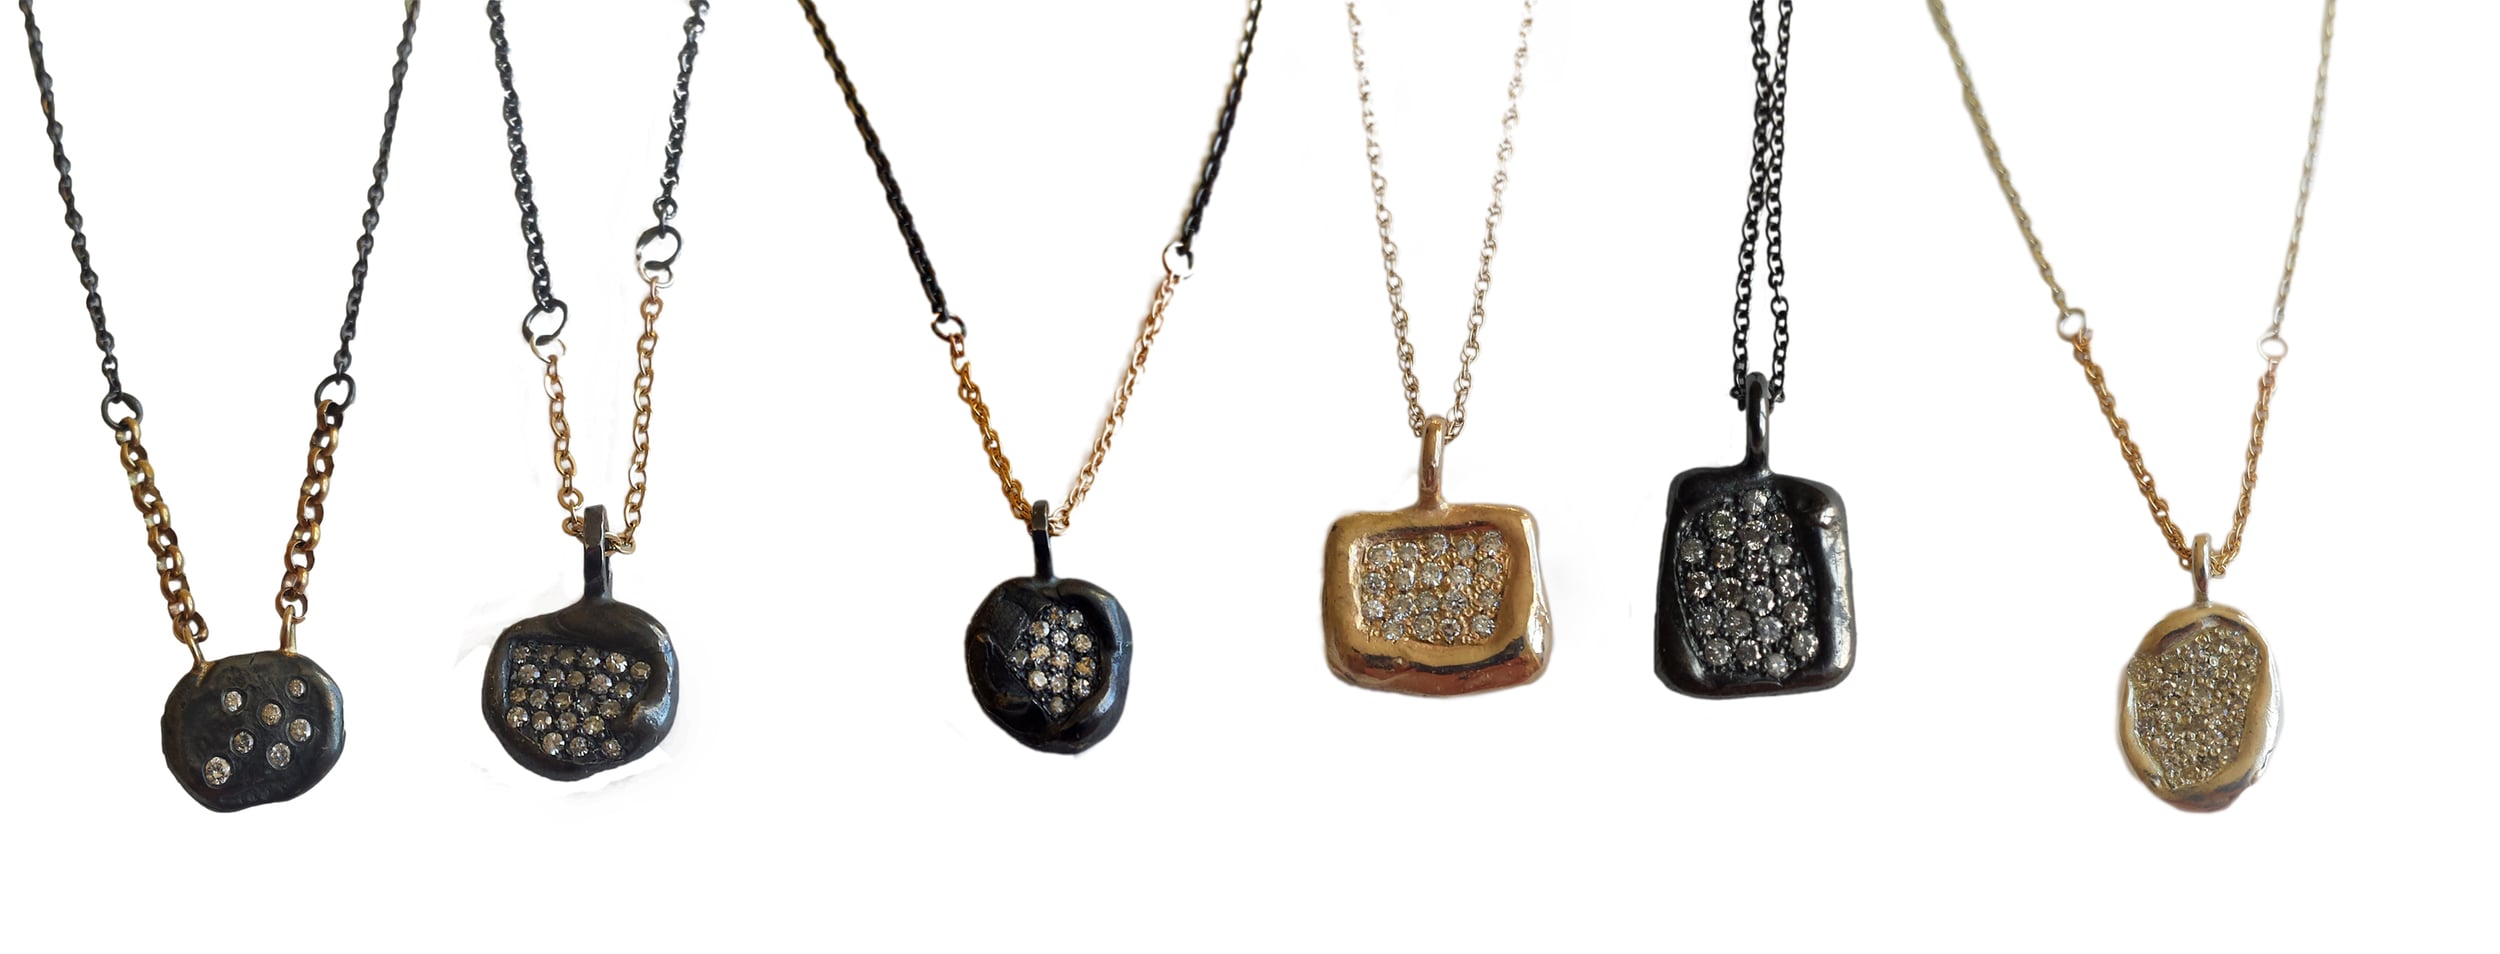 necklaces_groupa1.jpg